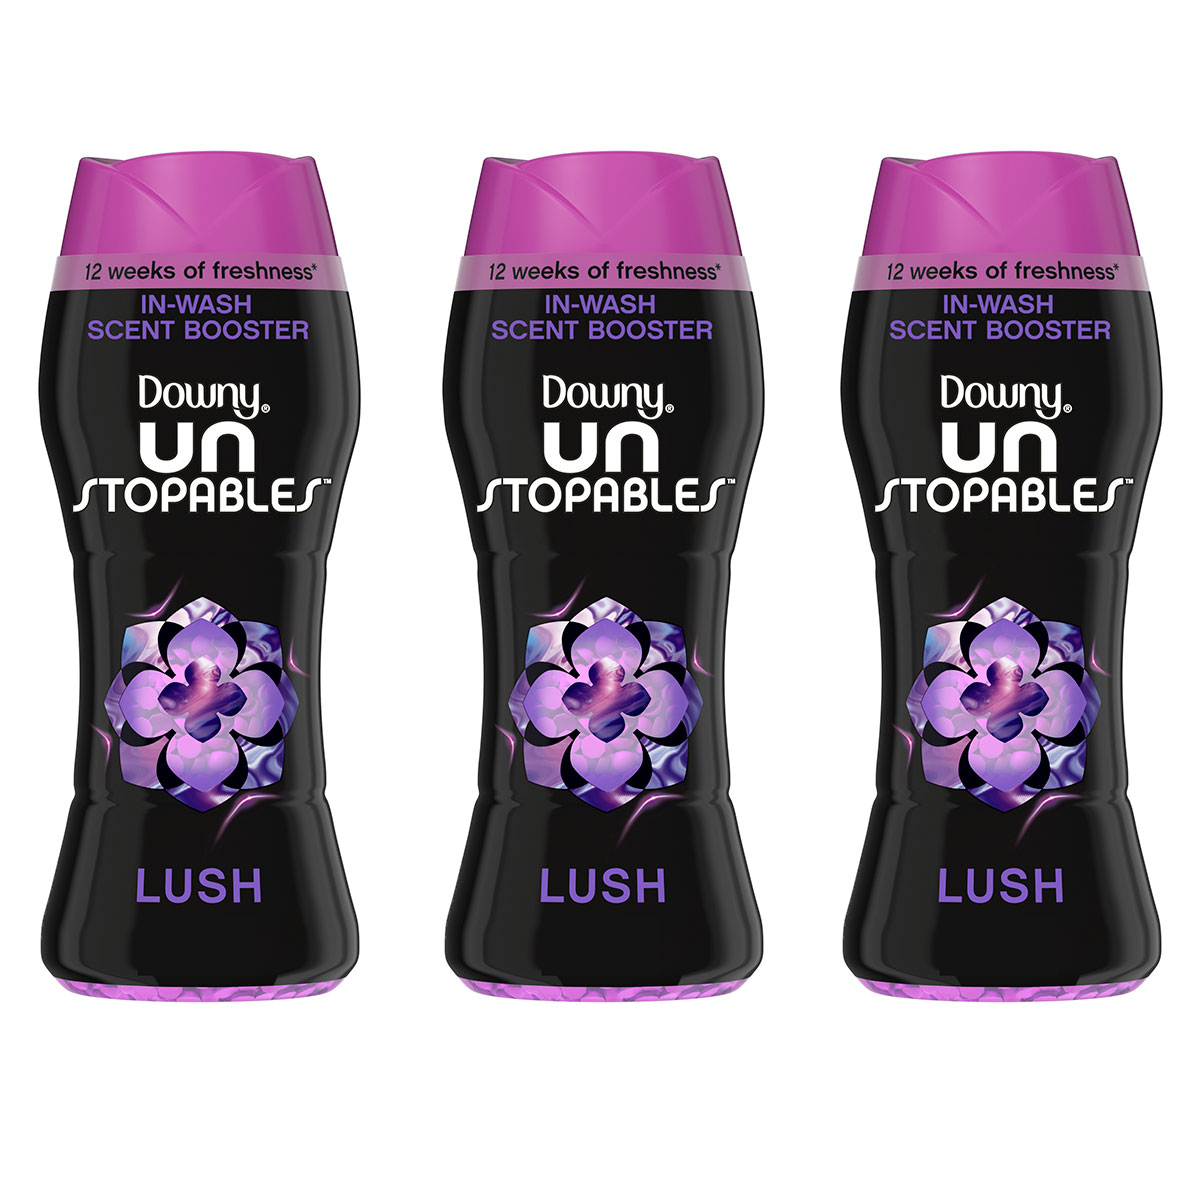 DOWNY UNSTOPABLES (BEADS) BOOSTER LUSH 141 GR - 3 UNI